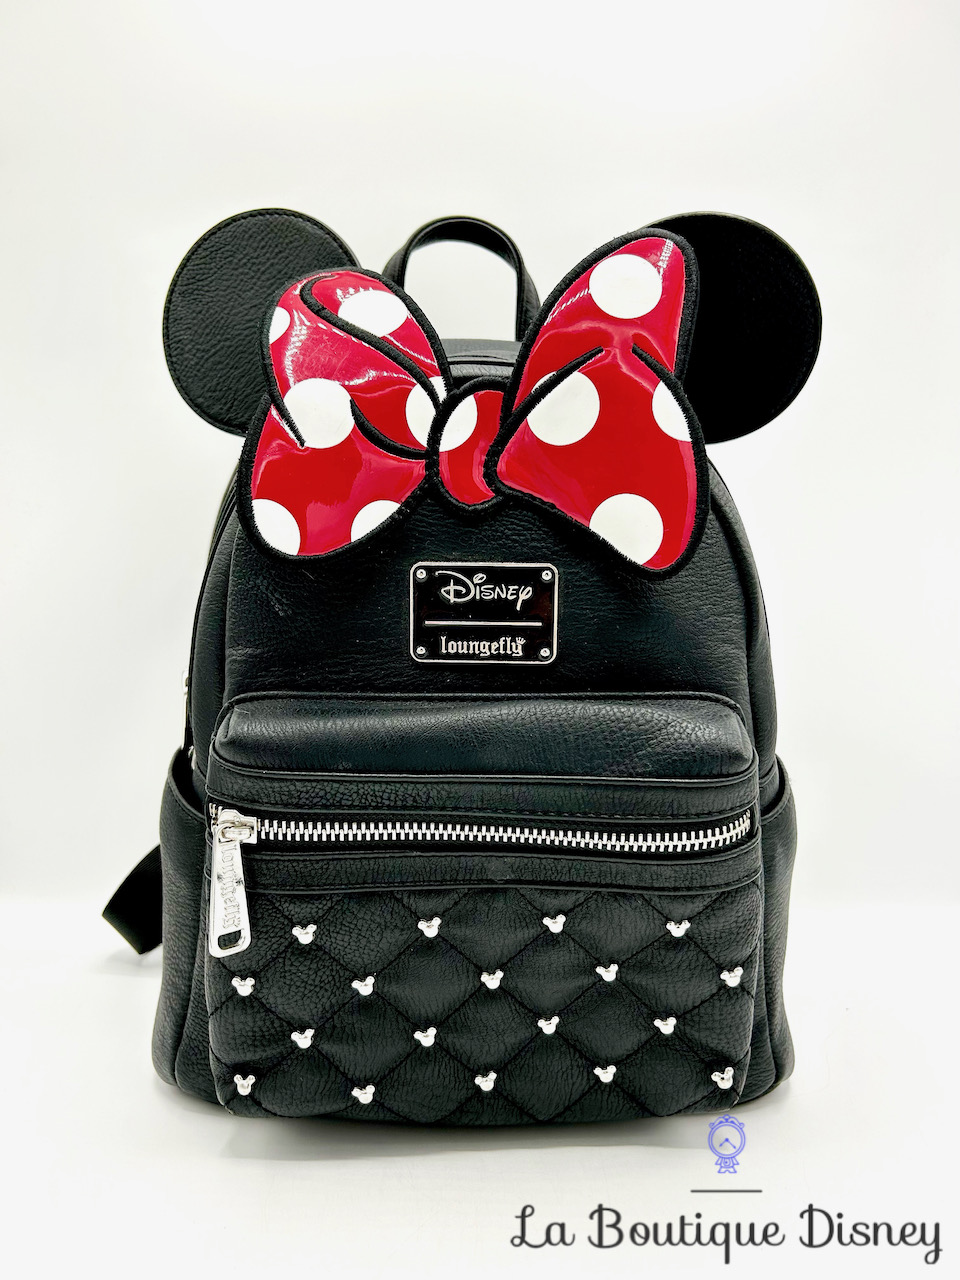 Sac à dos Loungefly Minnie Mouse Bow Disney 2019 noeud rouge noir